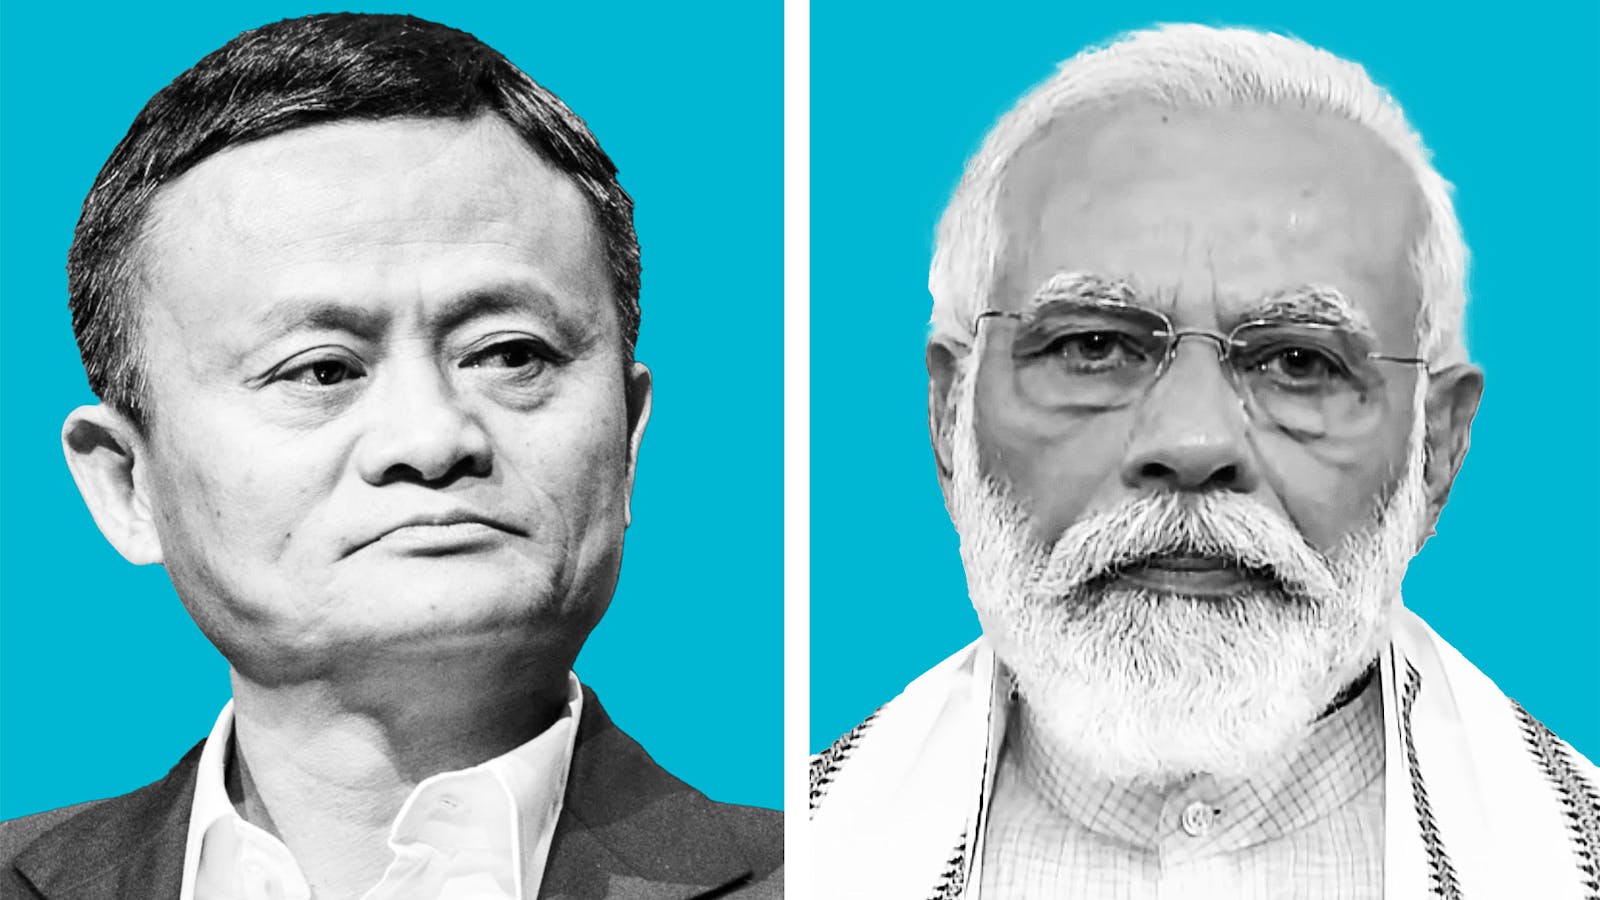 Alibaba's Jack Ma and Indian prime minister Narendra Modi. Photos by Bloomberg and AP